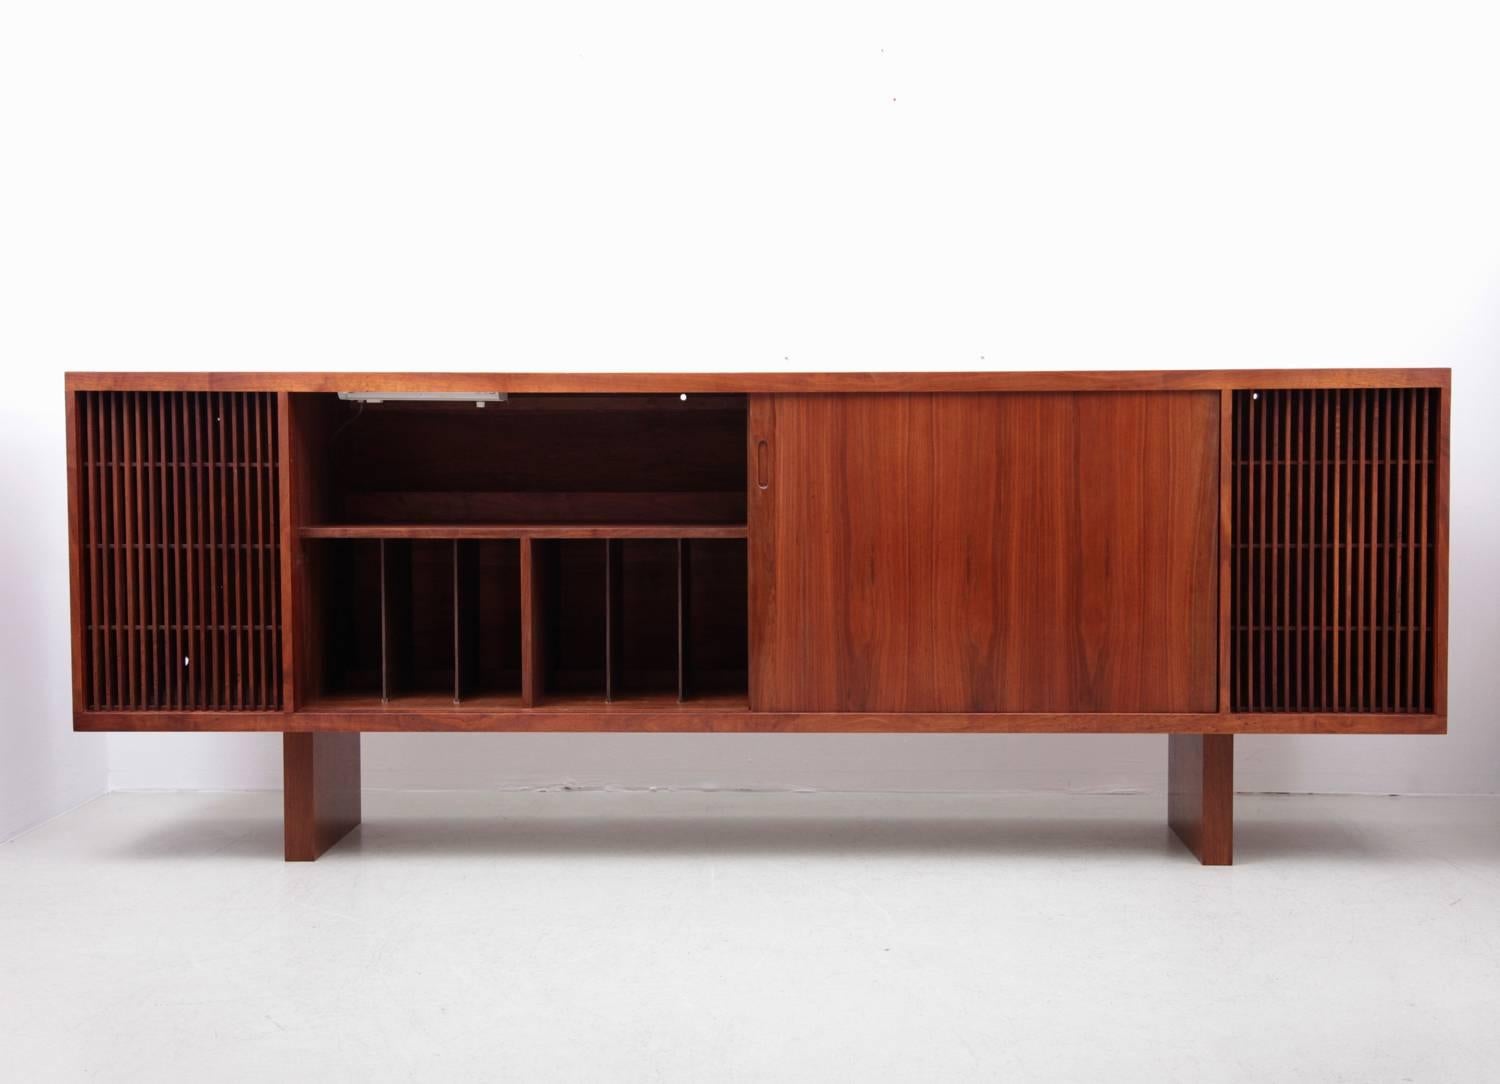 This cabinet is made in one piece and the quality is extraordinary. The left and right wooden slats part is to hide speakers. You can fill the center parts with records and Hifi. An amazing sideboard for every music lover.

